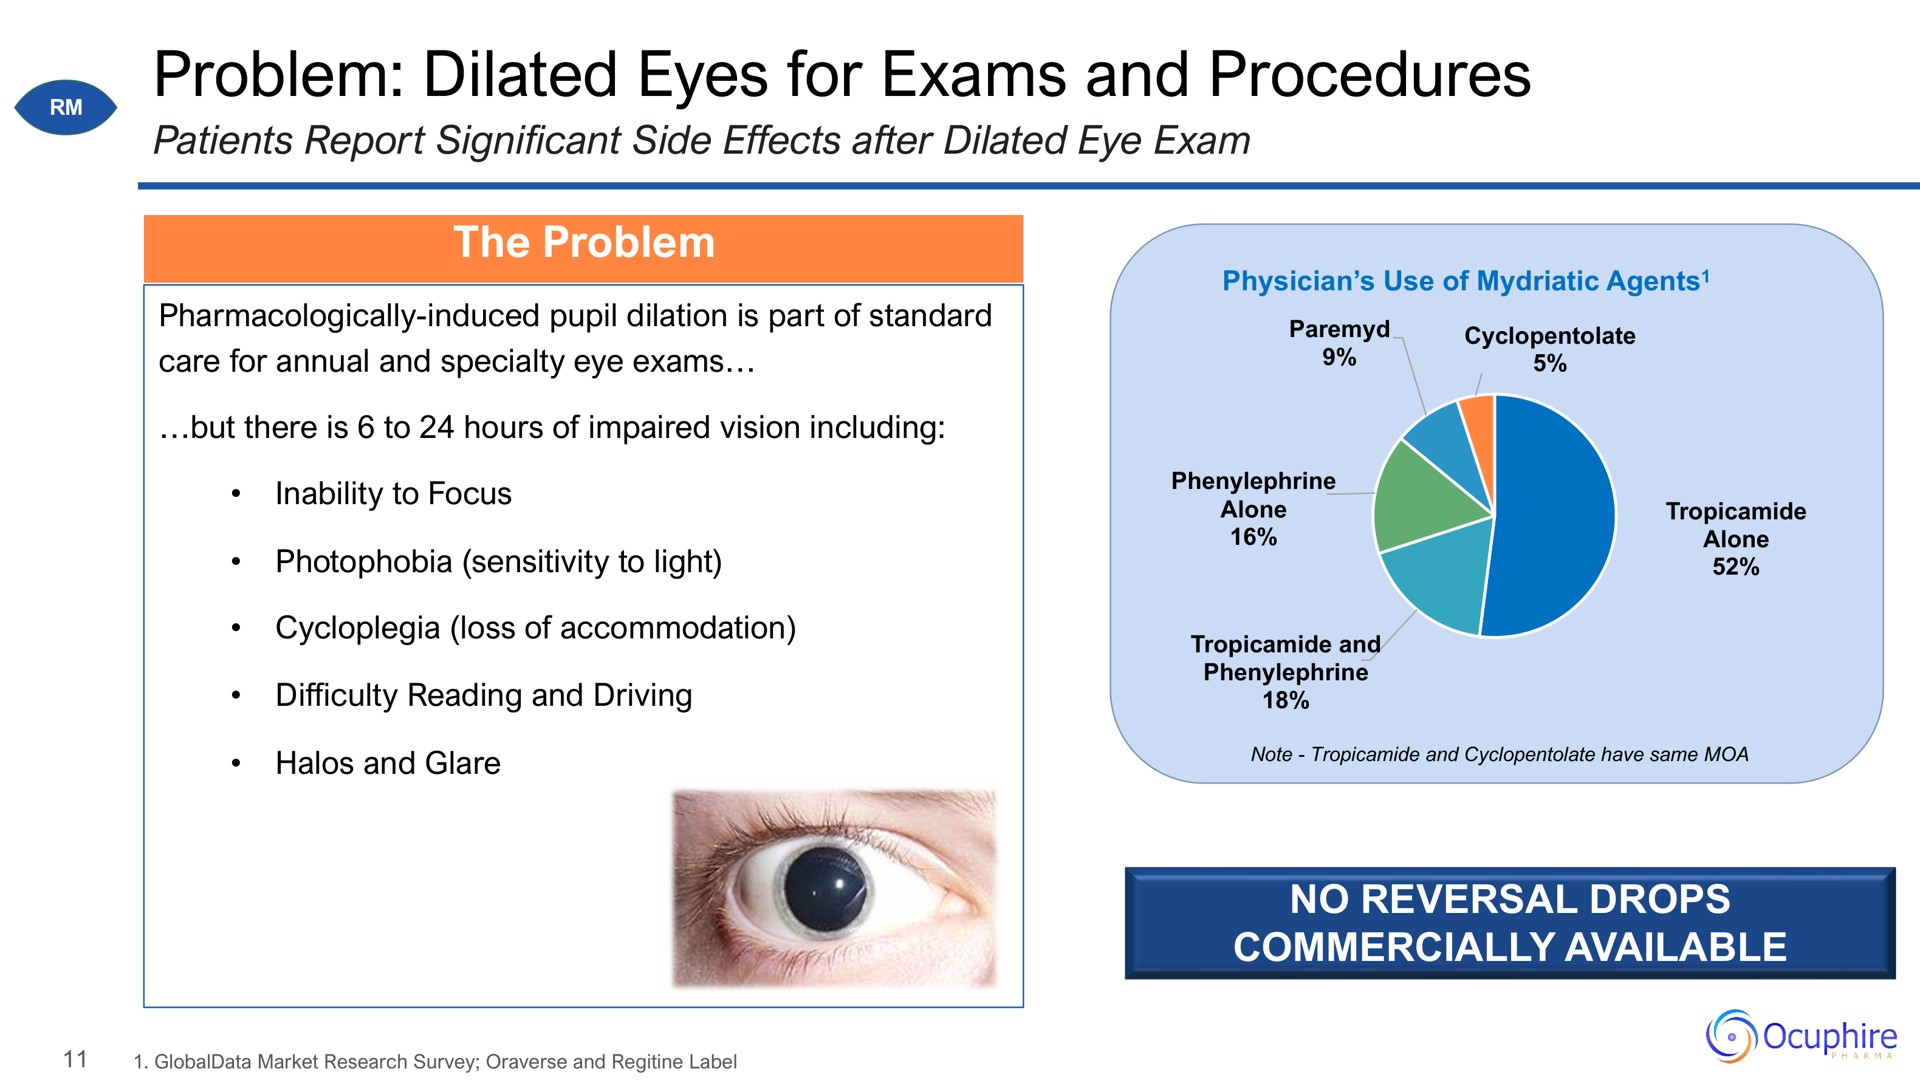 problem dilated eyes for exams and procedures | Ocuphire Pharma